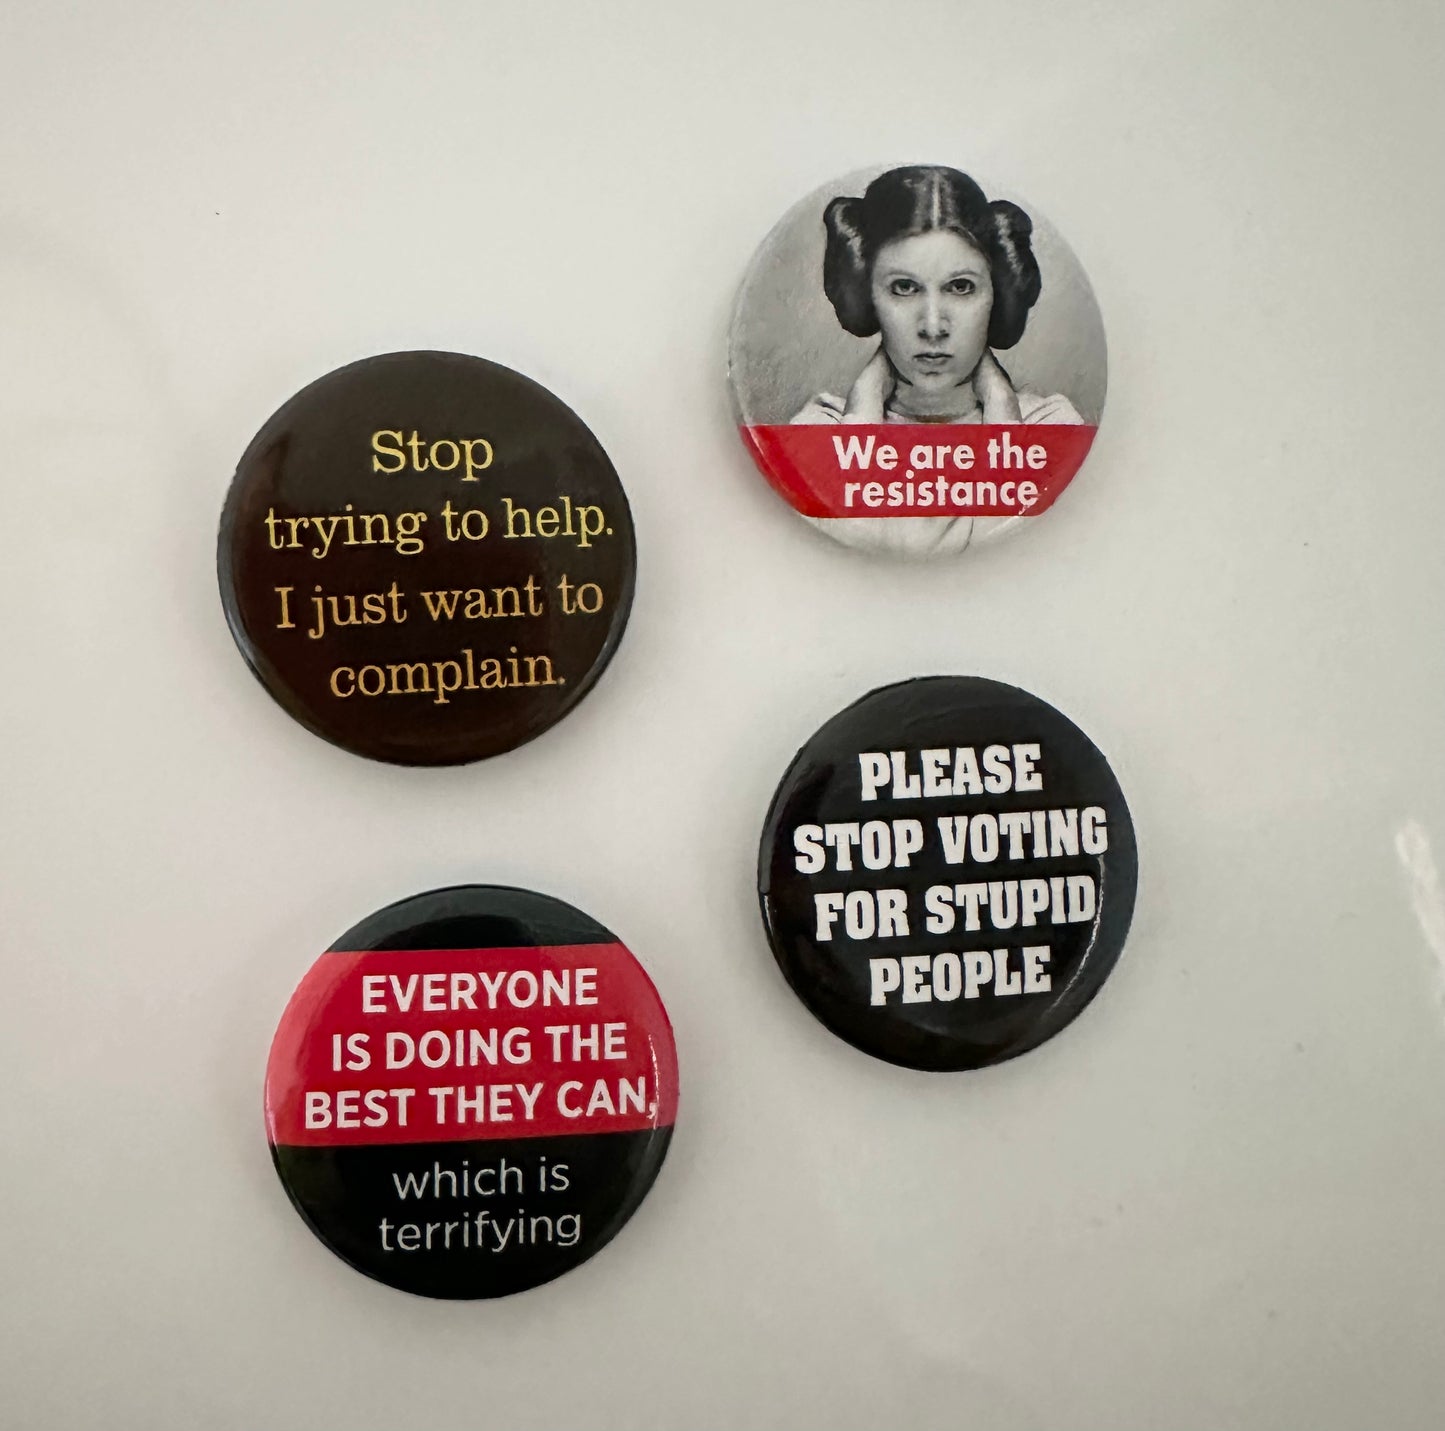 Please Stop Voting For Stupid People Button Magnet